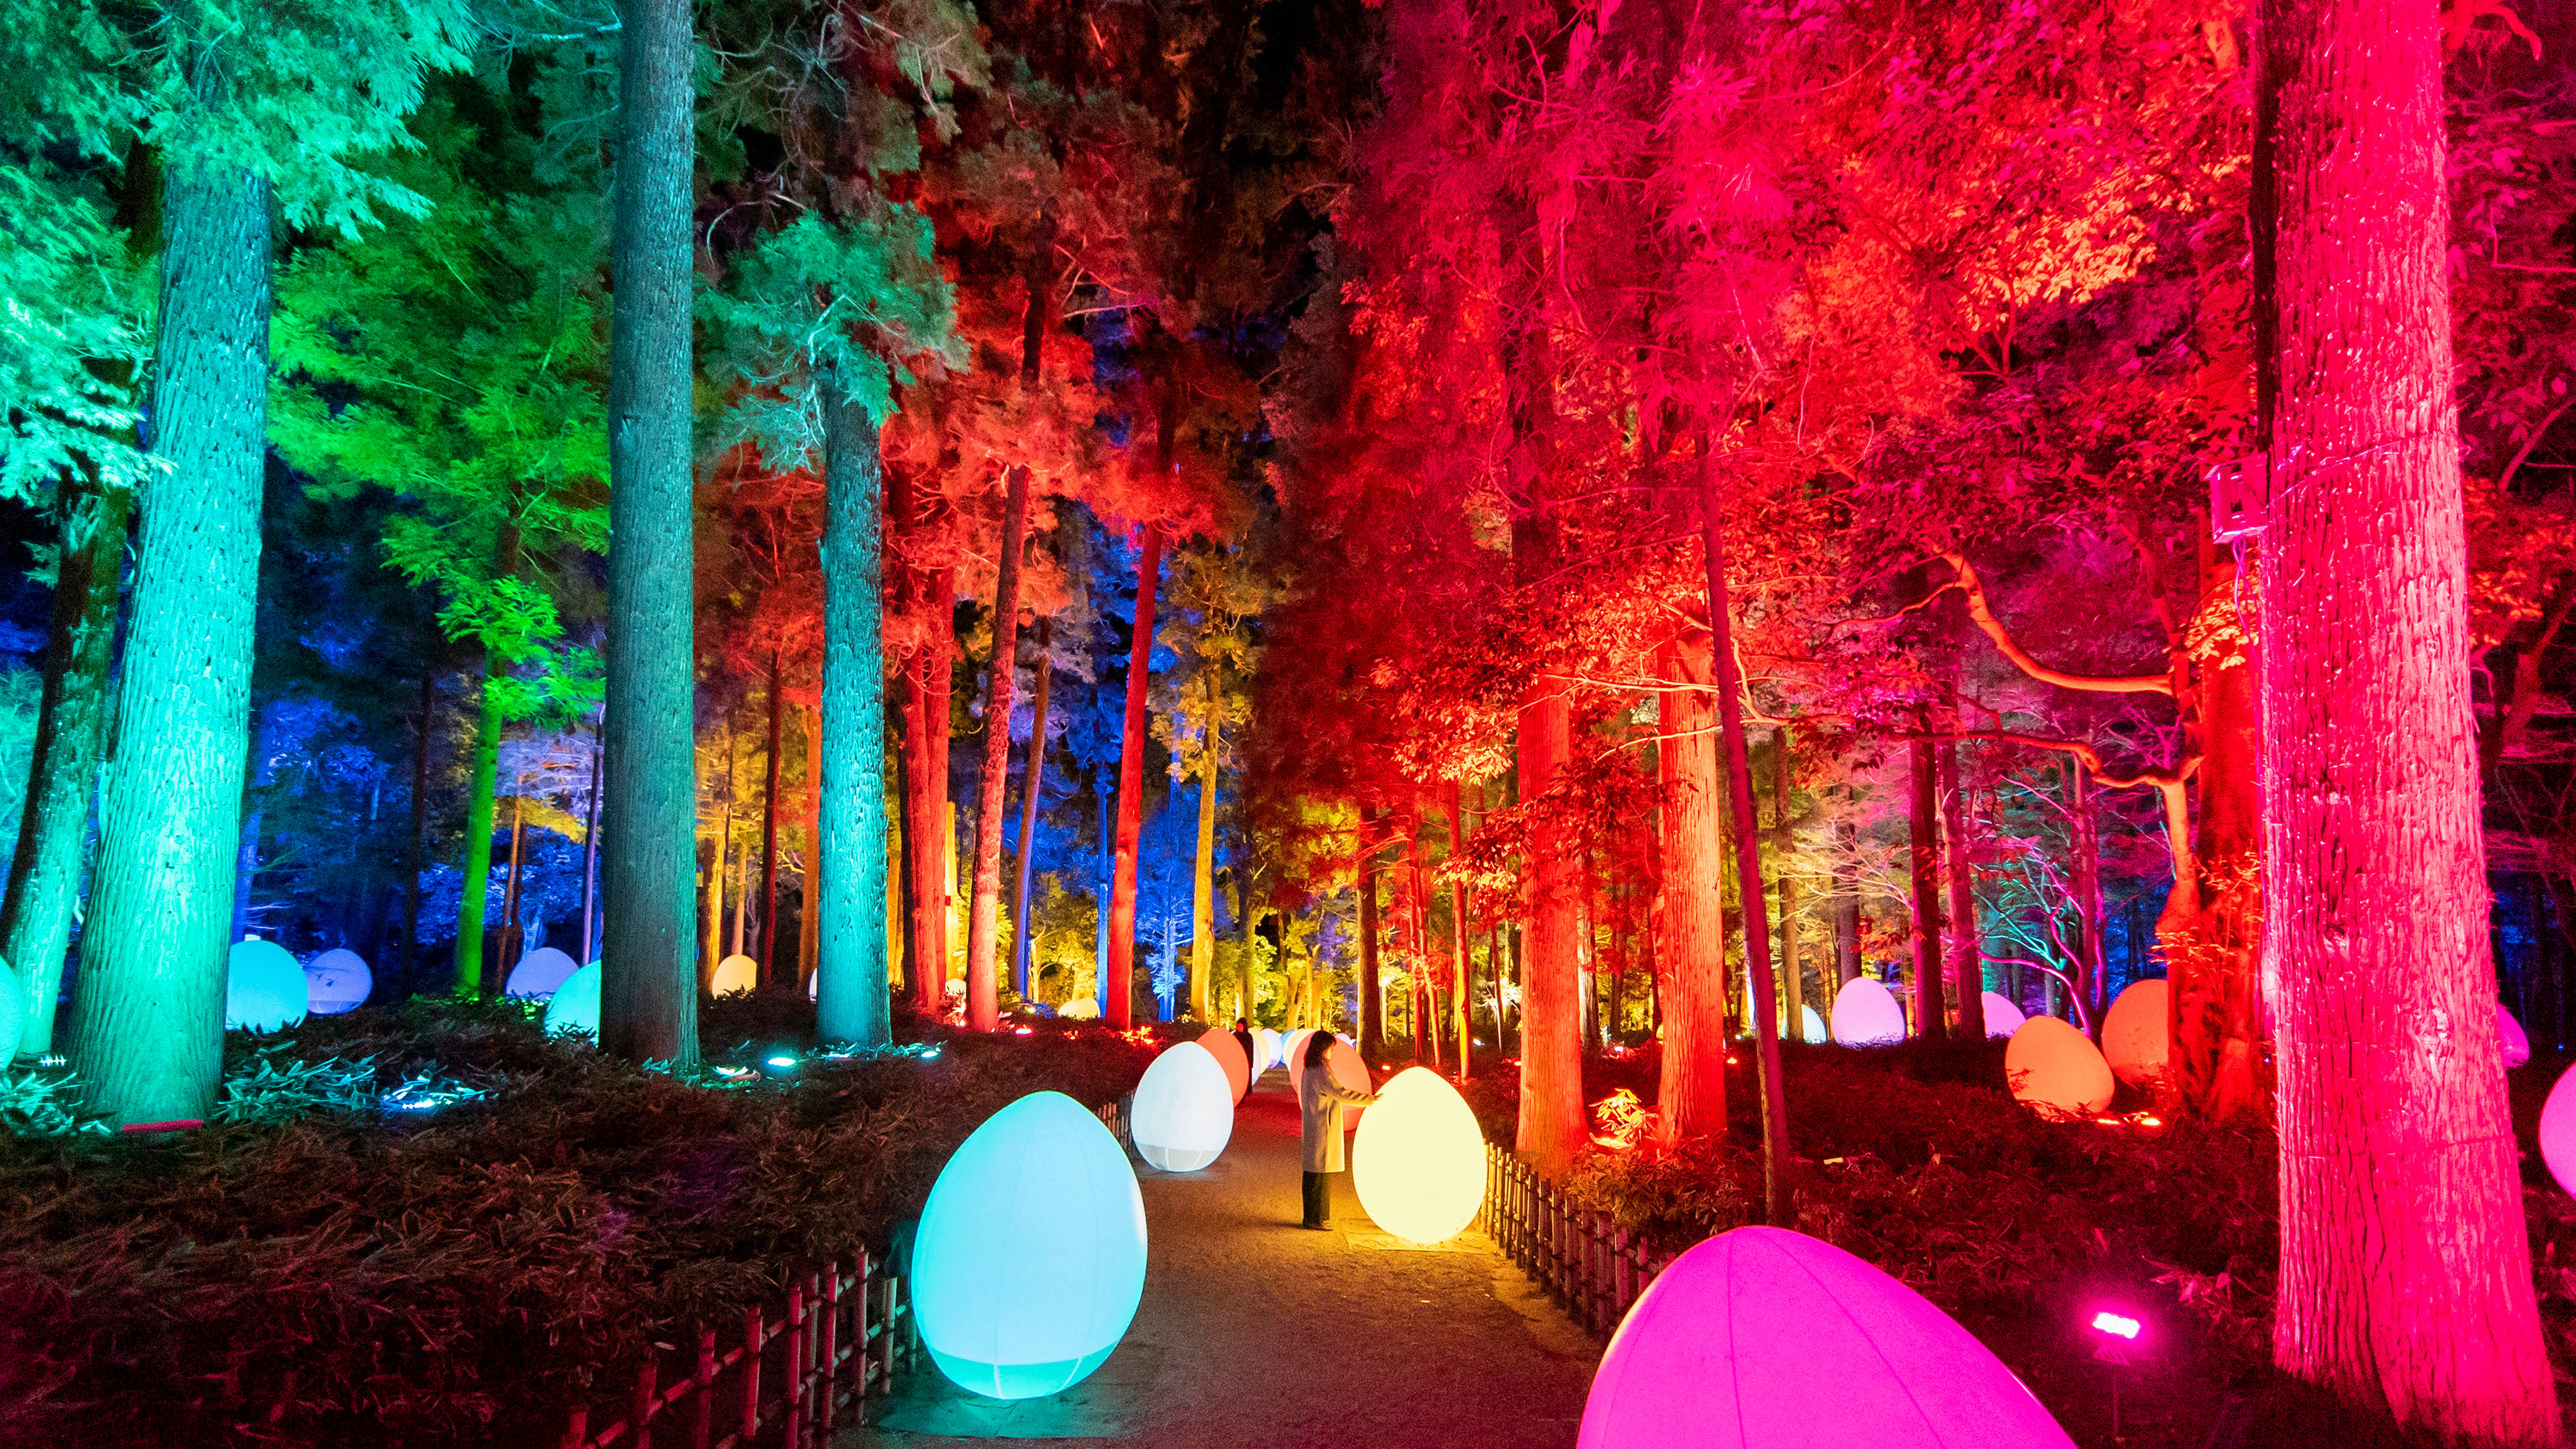 A New teamLab Exhibition at One of the 'Three Great Gardens' of 